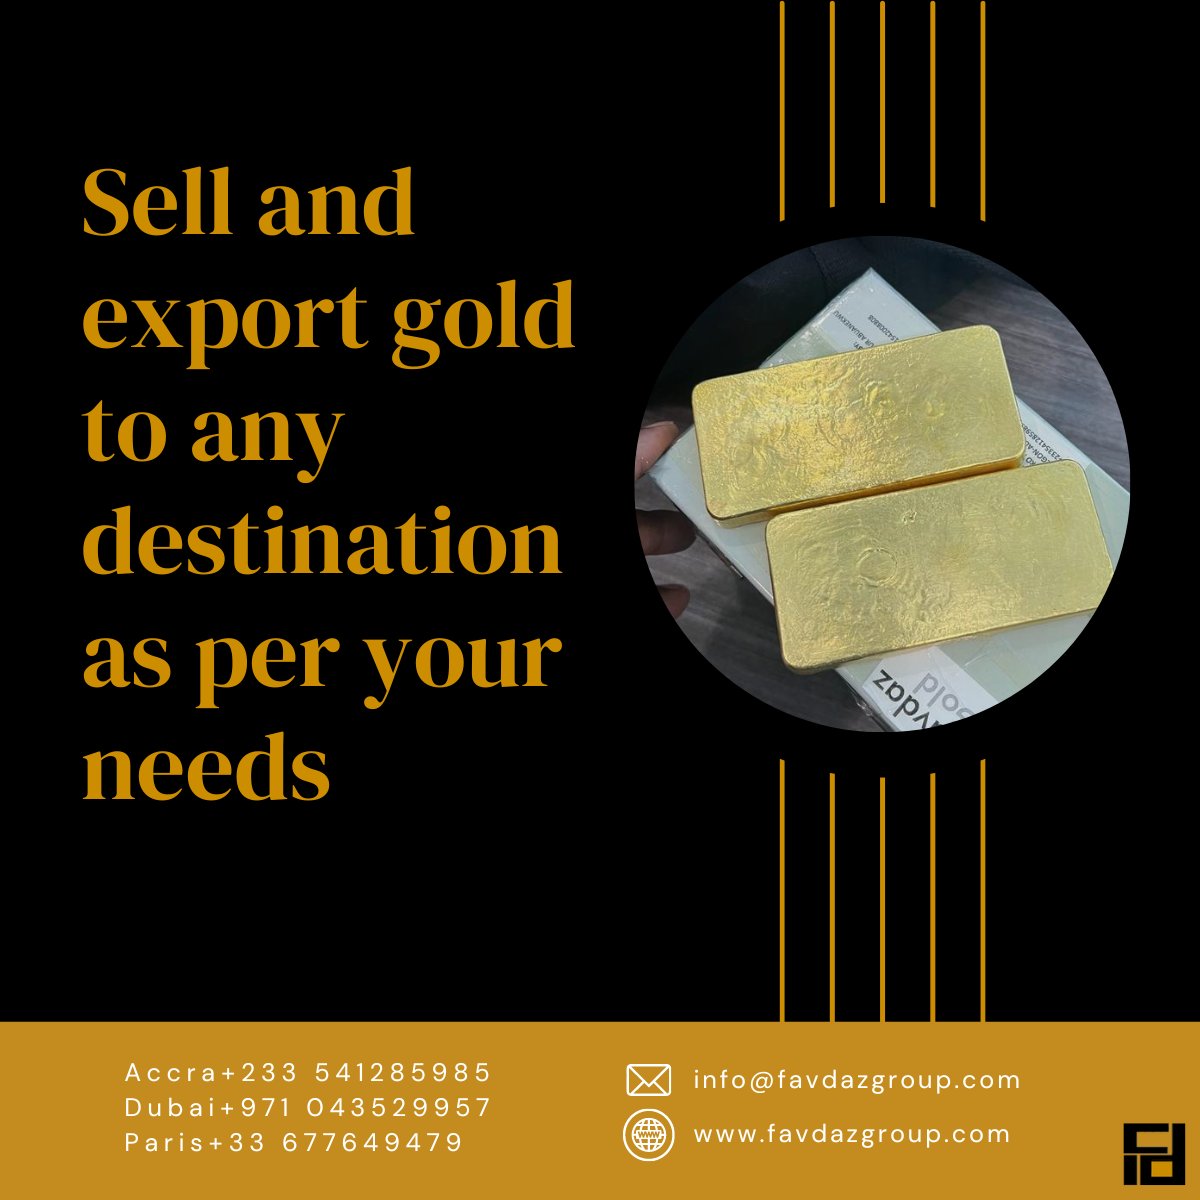 Looking for something specific? You're in luck! We offer bespoke services, selling and exporting gold to any destination as per your needs.

Choose Favdaz Gold, where quality meets trust. 💛 

#FavdazGold #GoldMining #GoldExport #dubaigold #goldtrading #goldseller